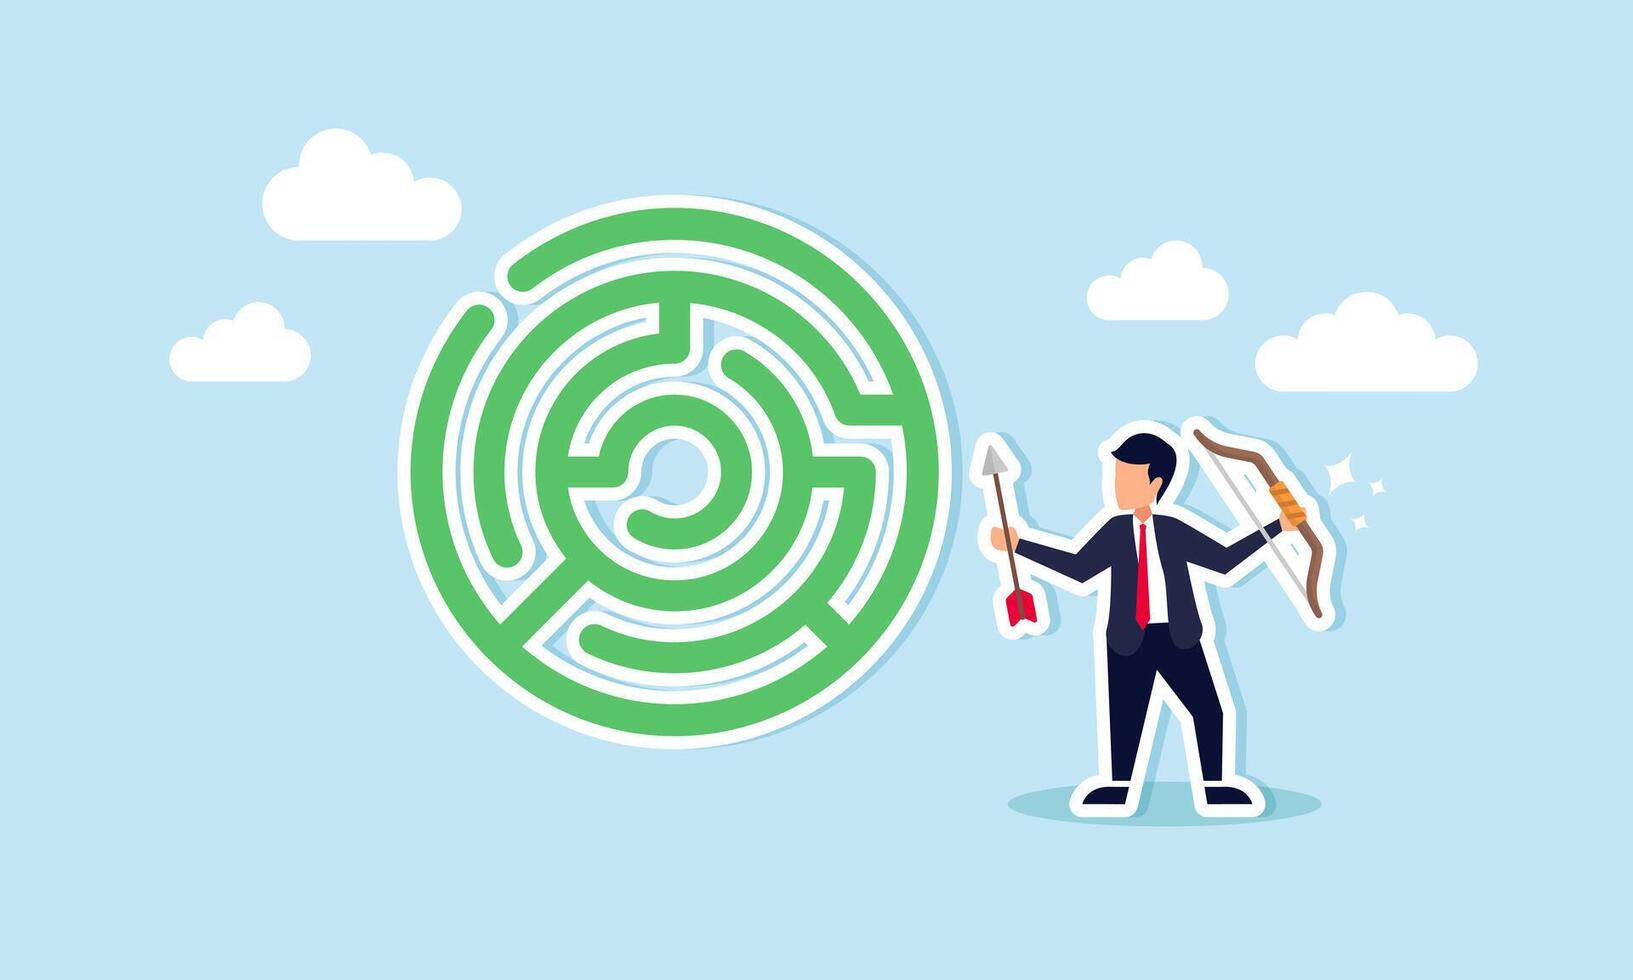 Seeking solutions to overcome obstacles and reach goals is the path to success. Like an archer aiming through a maze, a businessman navigates challenges to achieve targets vector